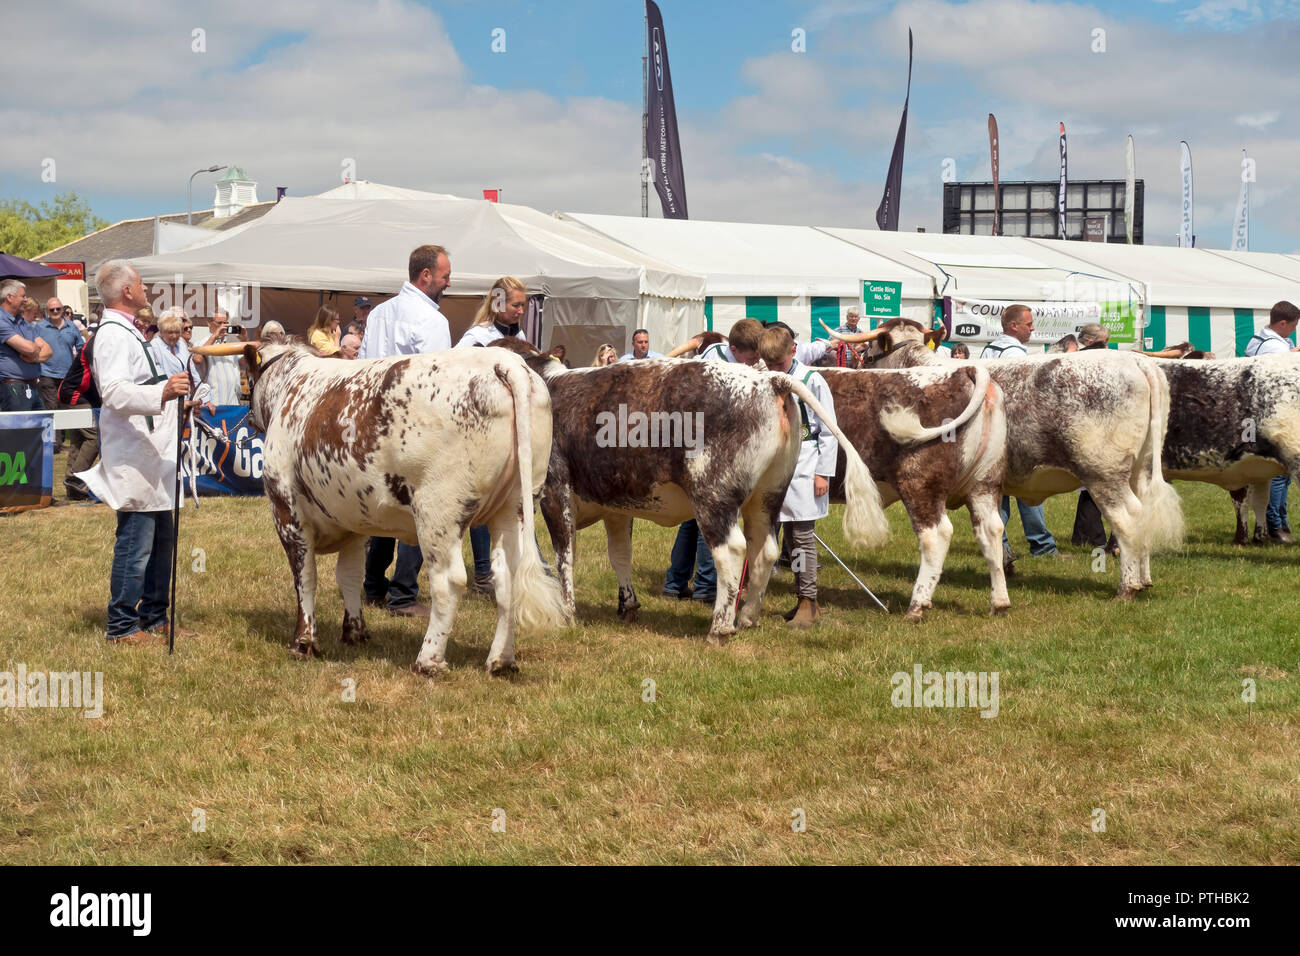 Farmers farmer with Longhorn cattle at judging Great Yorkshire Show in summer Harrogate North Yorkshire England UK United Kingdom GB Great Britain Stock Photo